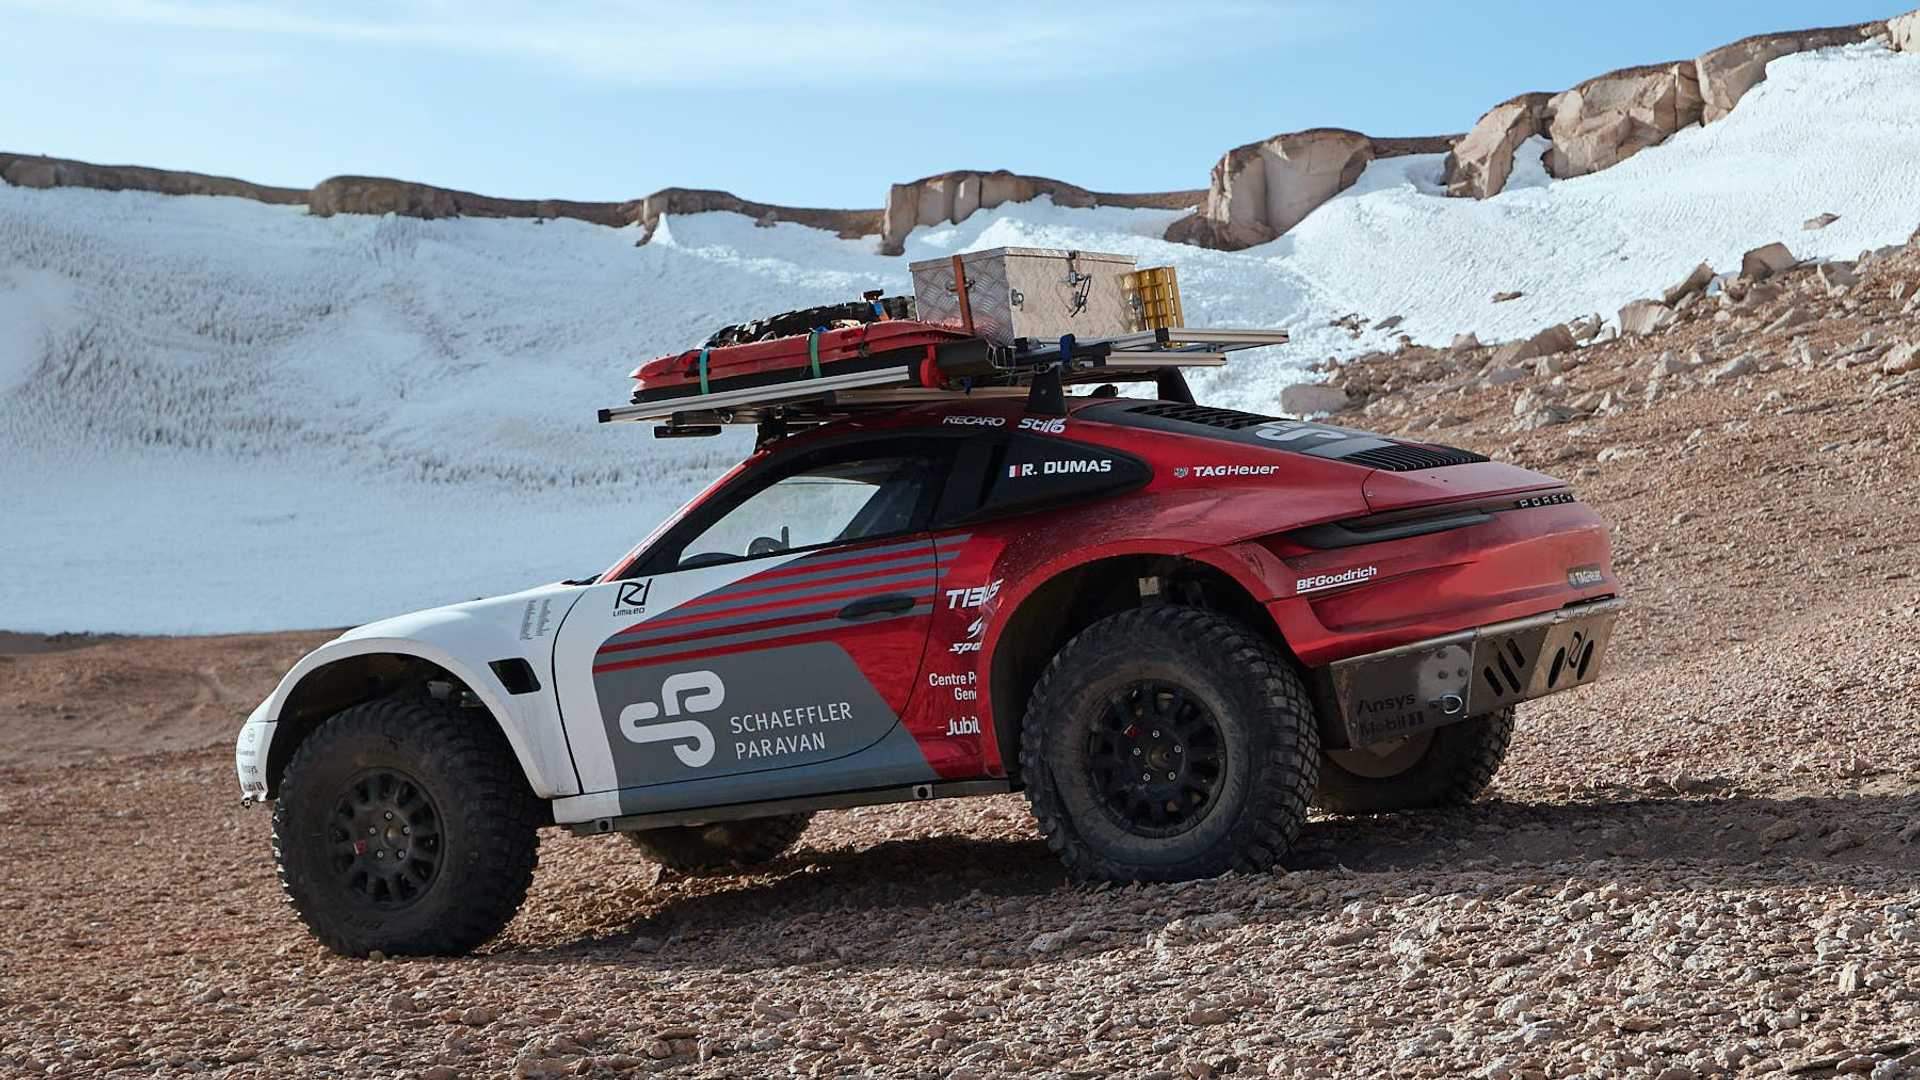 Two highly modified Porsche 911s just climbed the worlds tallest volcano